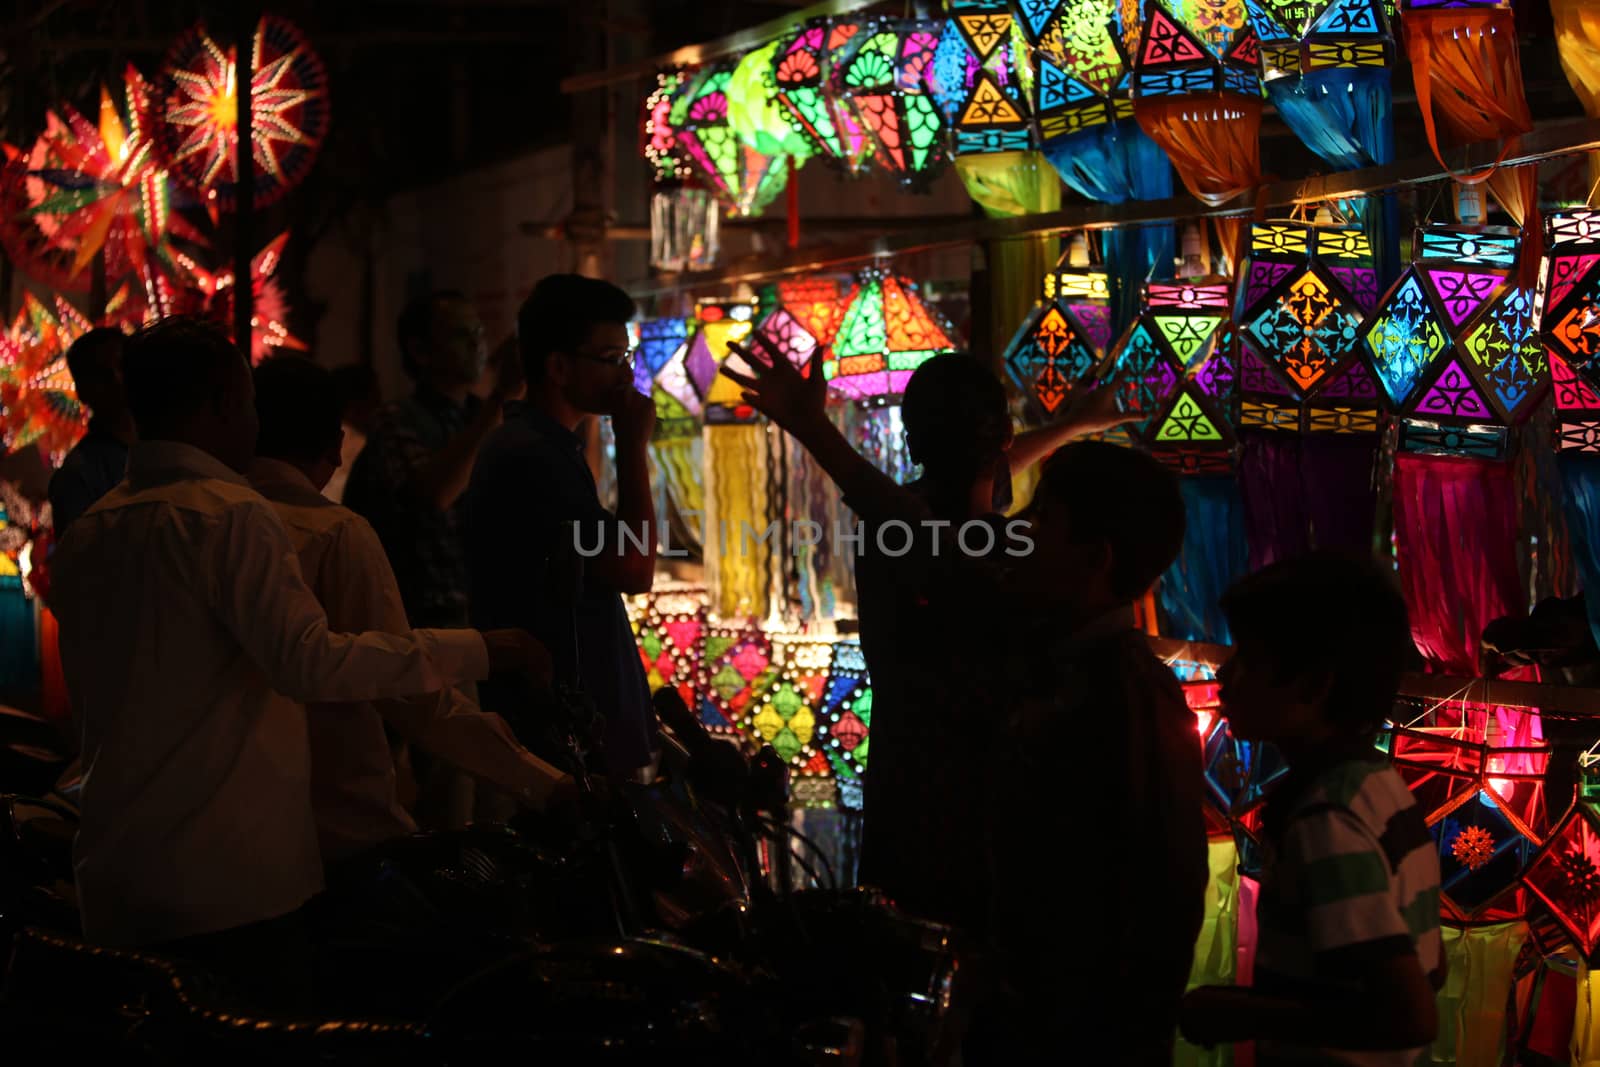 Pune, India - November 7, 2015: People in India shopping for sky lanterns on the occasion of Diwali festival in India